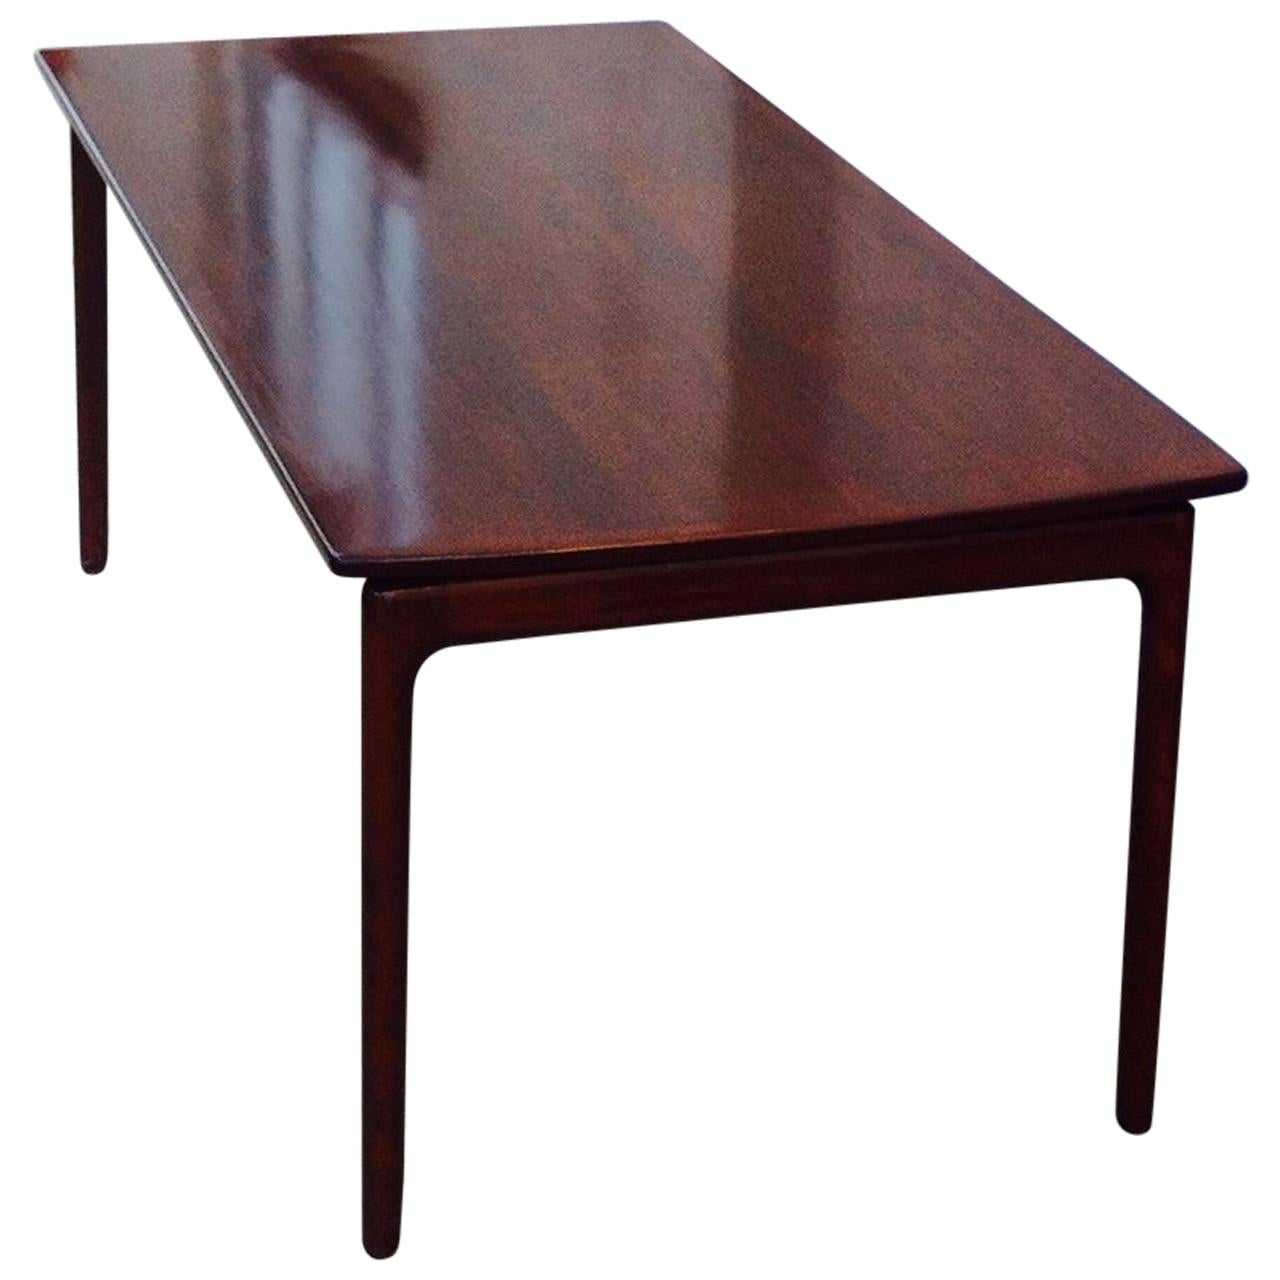 Danish Modern Mahogany Coffee Table with Floating Tabletop by Ole Wanscher 1960s